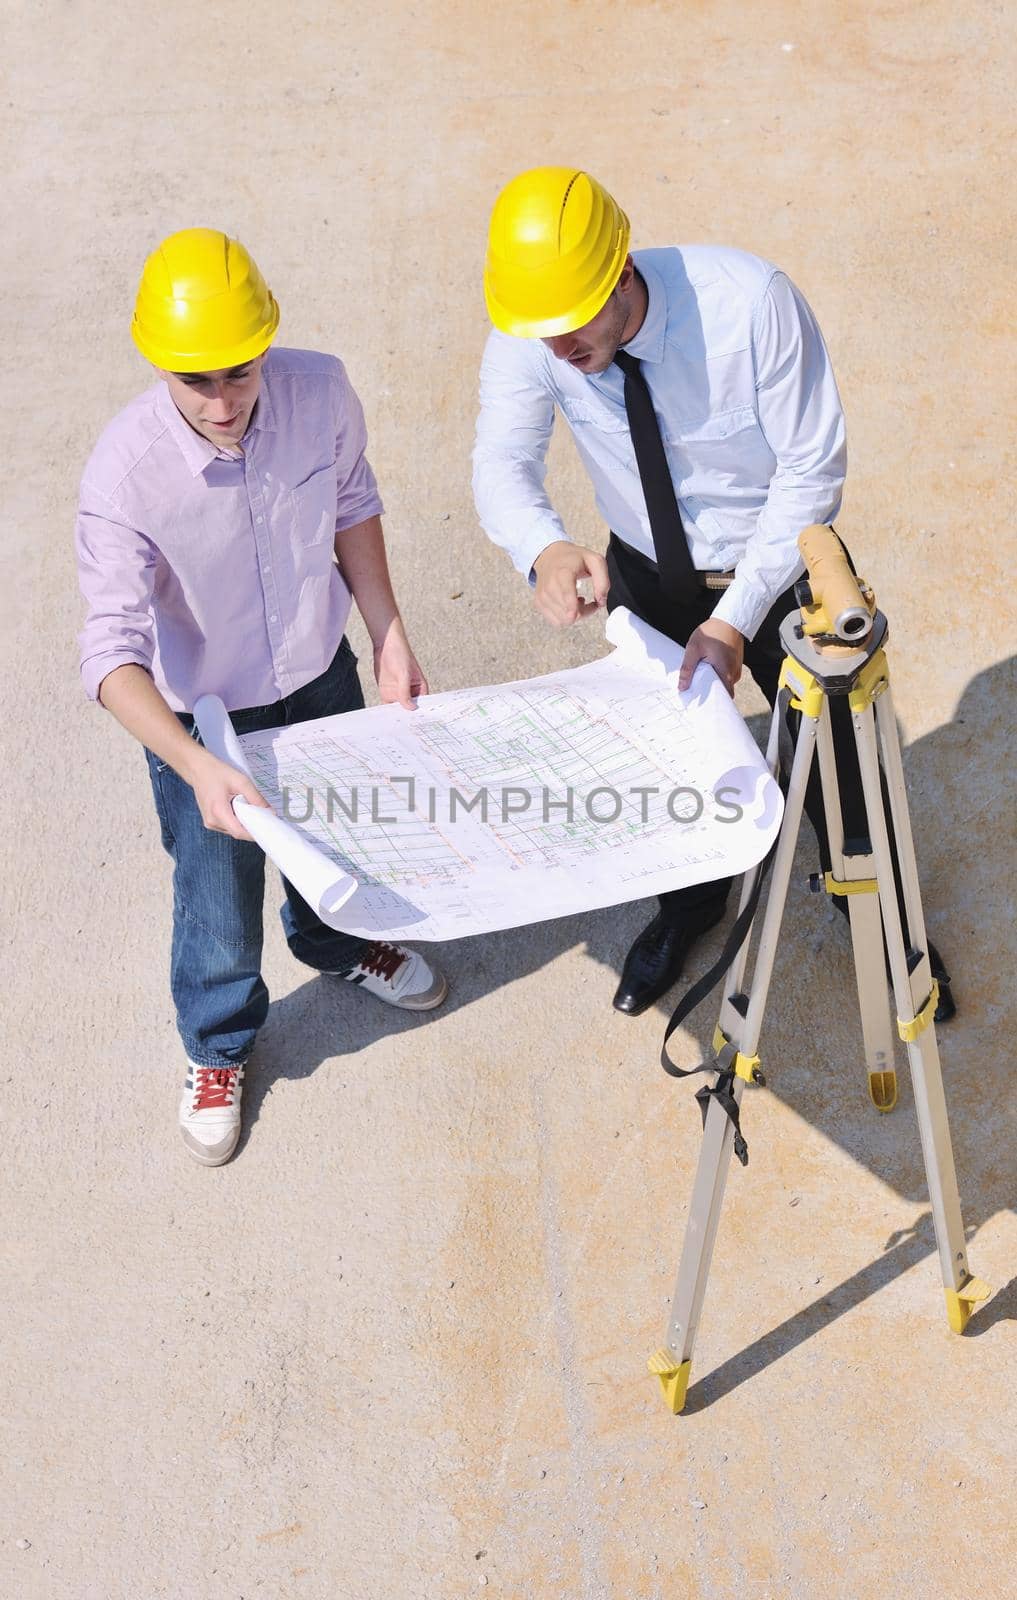 Team of business people in group, architect and engeneer  on construciton site check documents and business workflow on new building